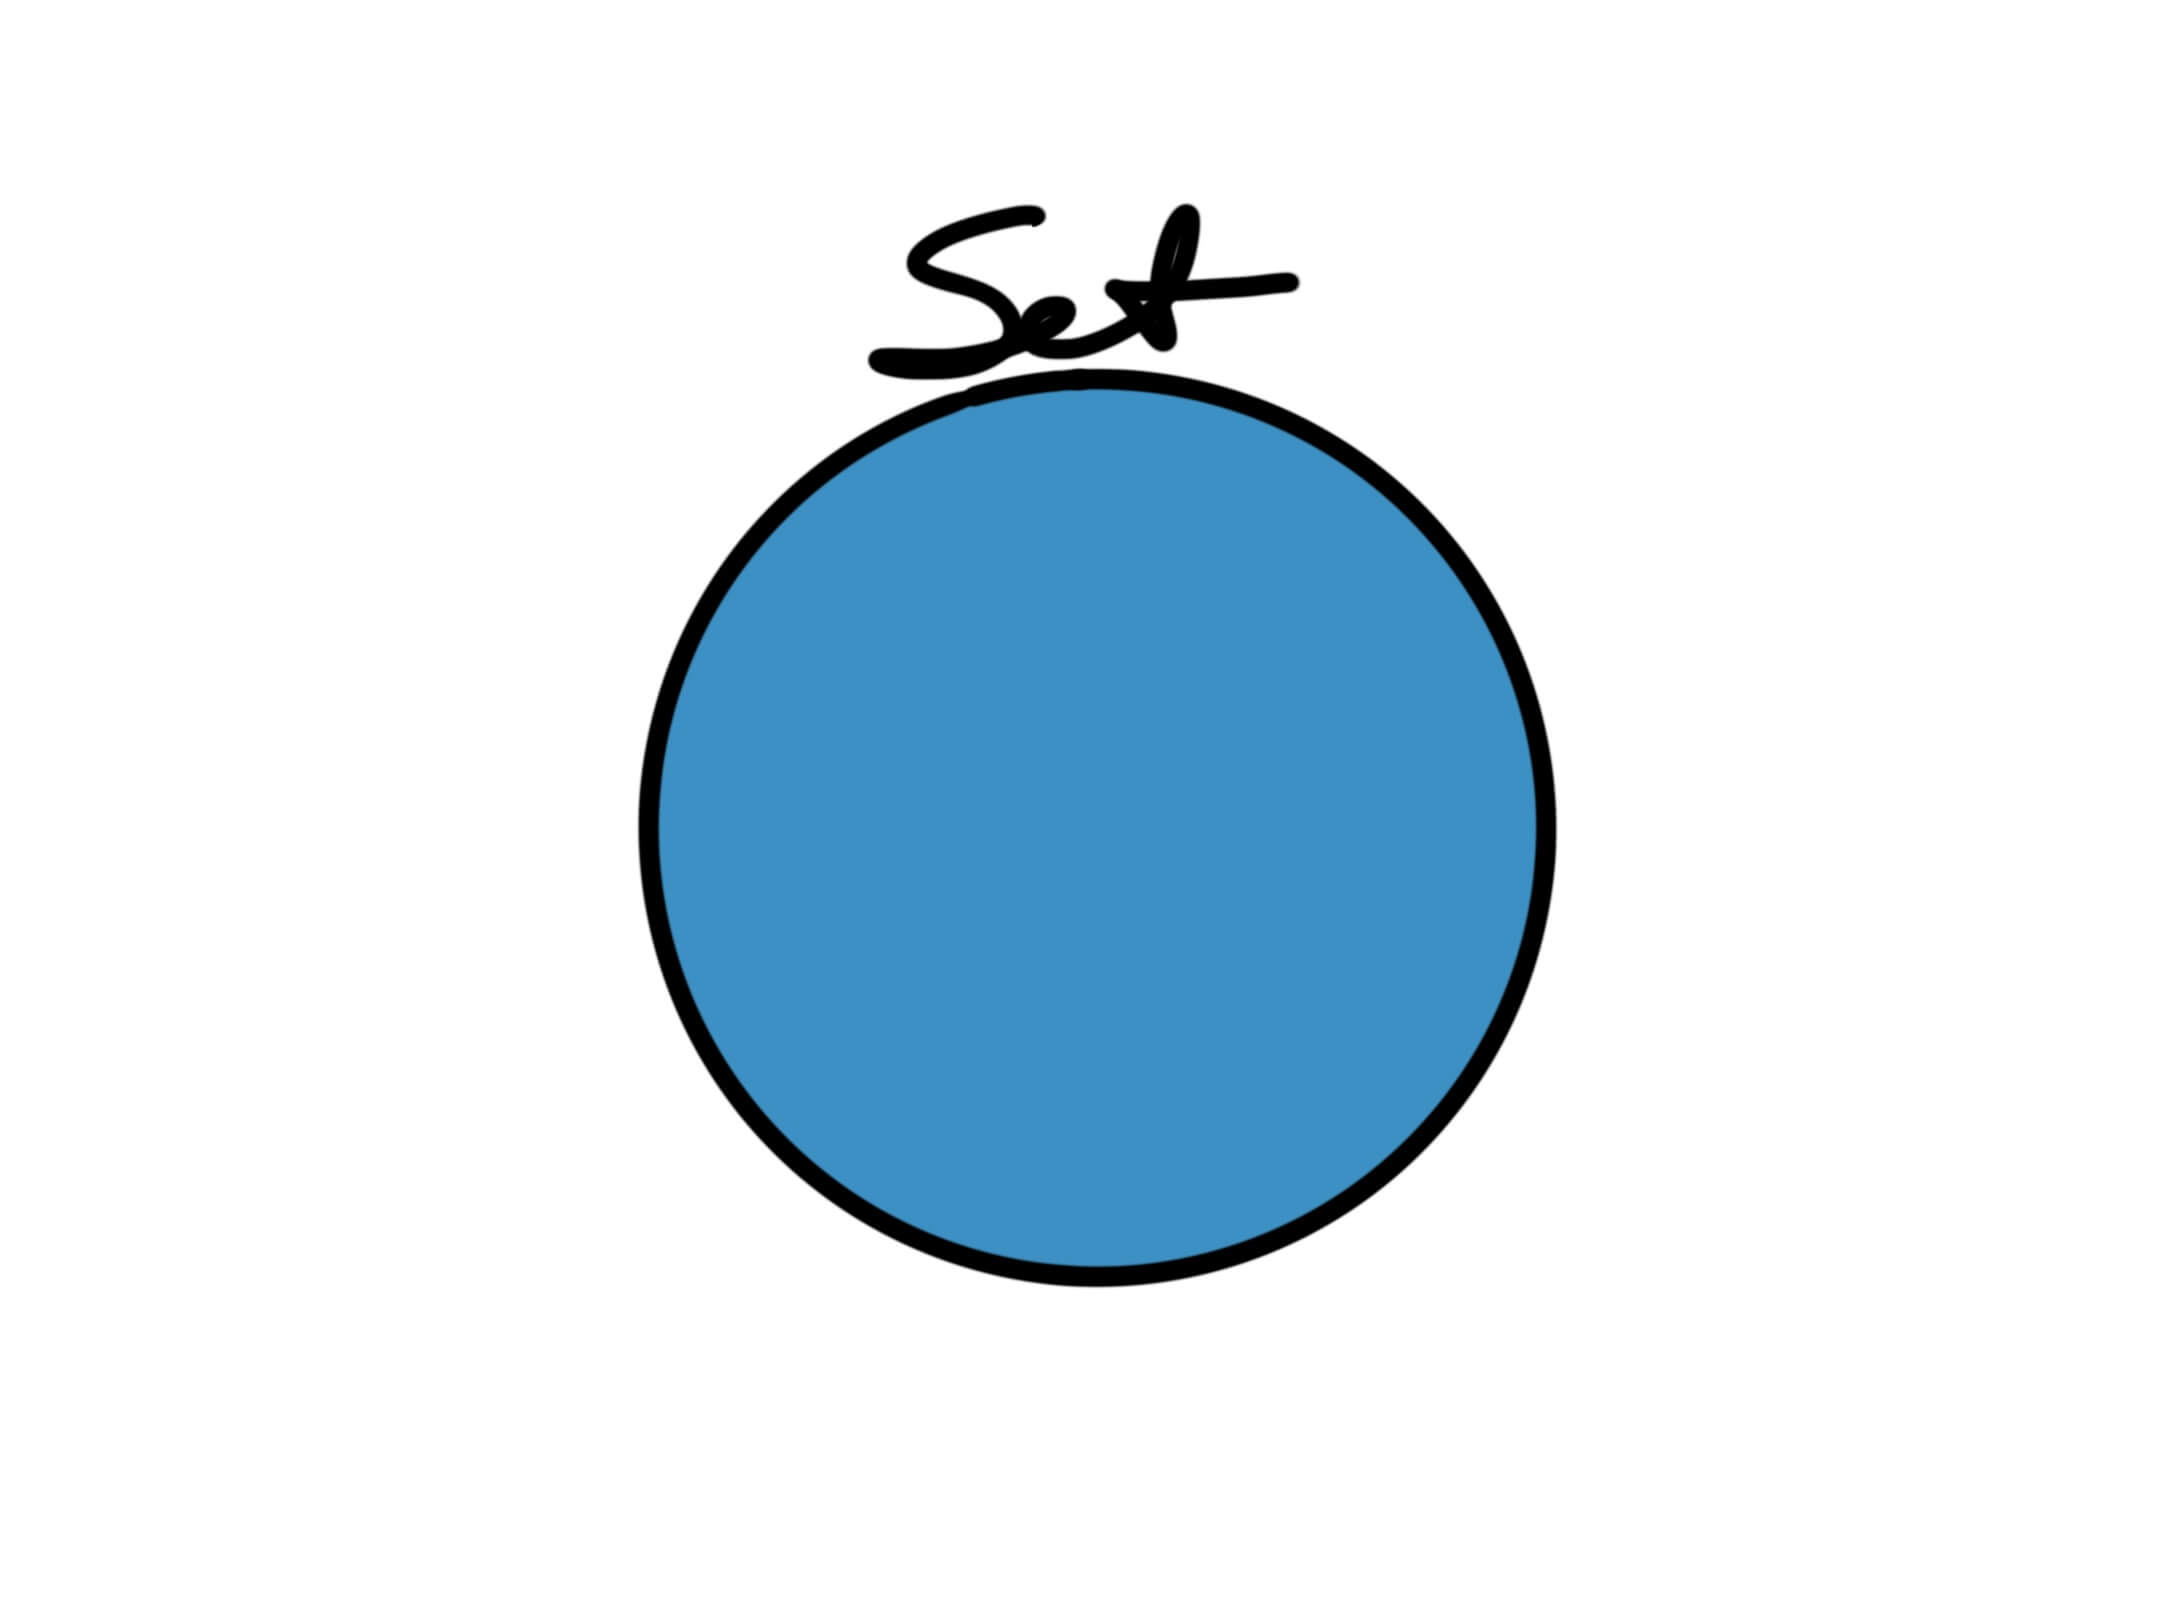 A circle representing a 'set', filled in with color